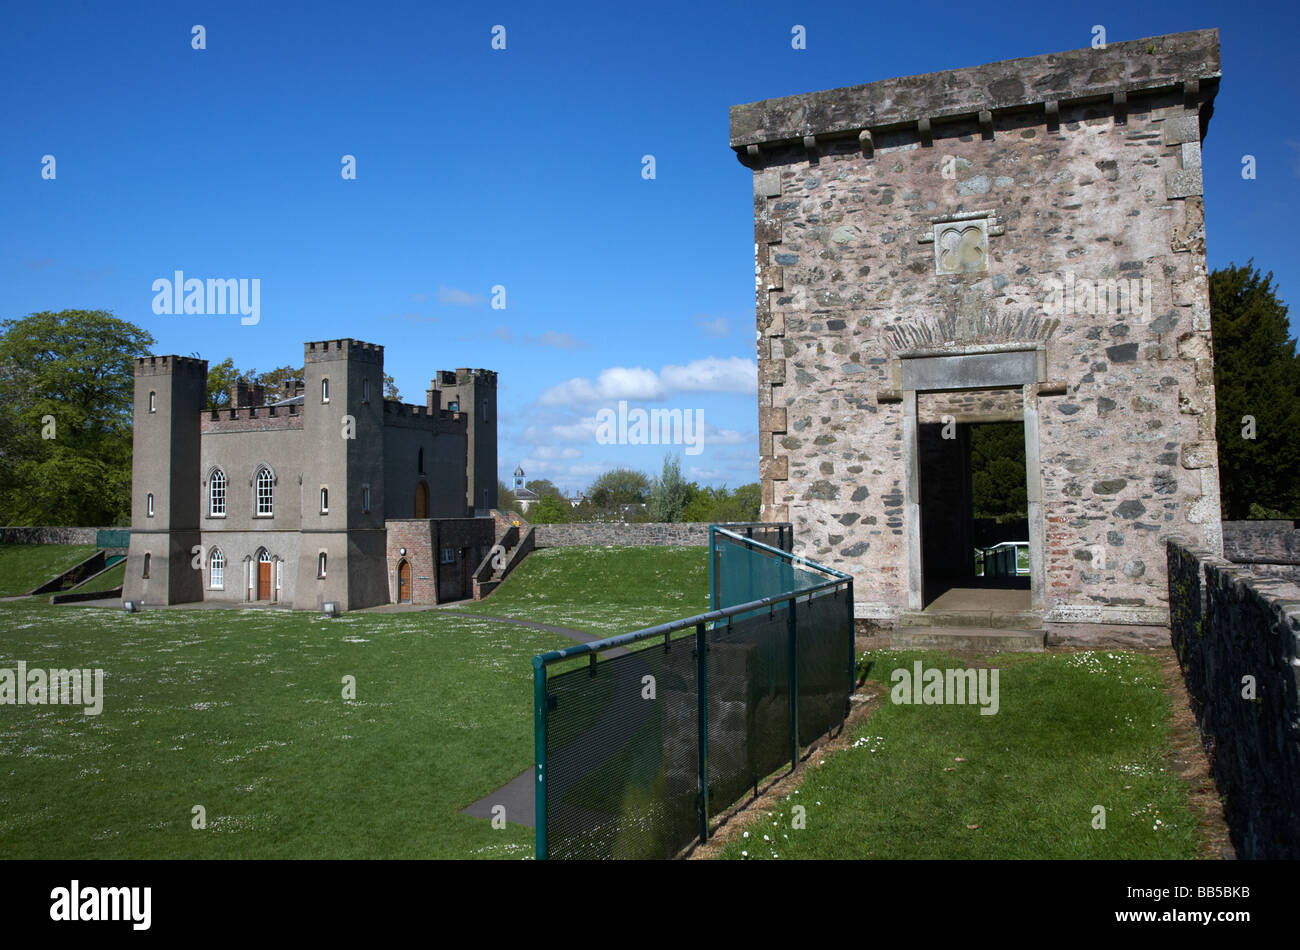 Hillsborough Fort gatehouse and walls founded in 1630 and finished around 1650 used as an artillery fortification Hillsborough Stock Photo